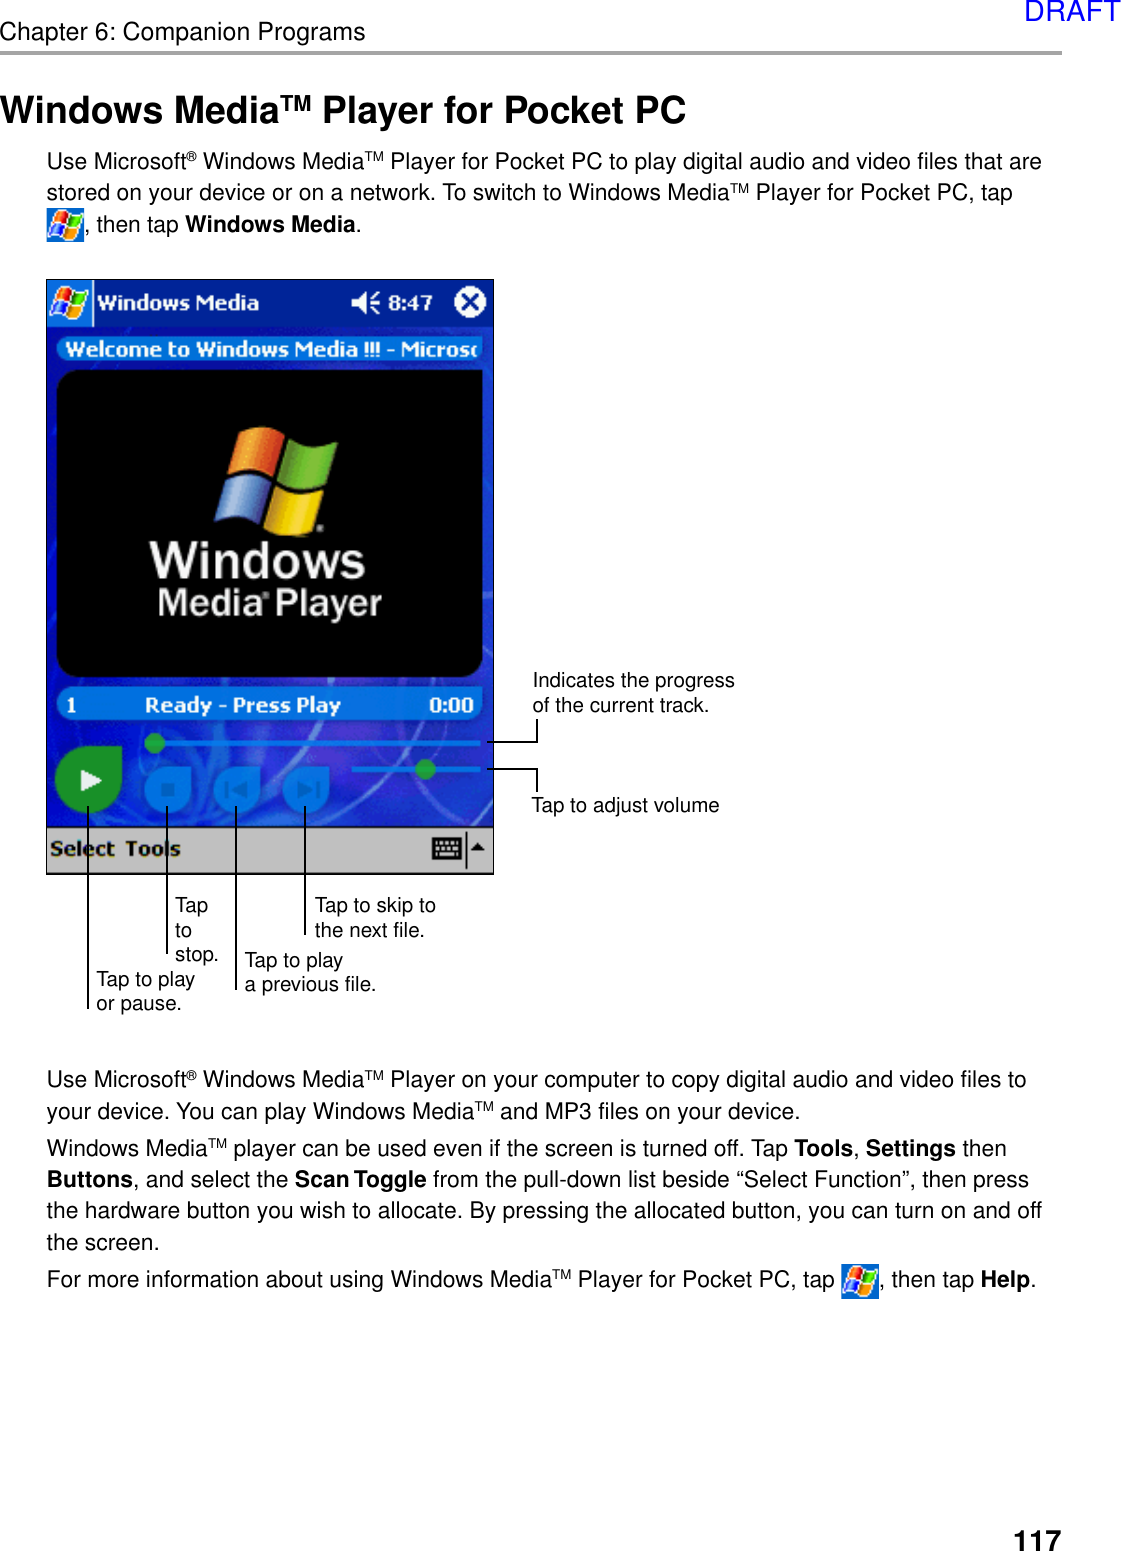 117Chapter 6: Companion ProgramsWindows MediaTM Player for Pocket PCUse Microsoft® Windows MediaTM Player for Pocket PC to play digital audio and video files that arestored on your device or on a network. To switch to Windows MediaTM Player for Pocket PC, tap, then tap Windows Media.Use Microsoft® Windows MediaTM Player on your computer to copy digital audio and video files toyour device. You can play Windows MediaTM and MP3 files on your device.Windows MediaTM player can be used even if the screen is turned off. Tap Tools, Settings thenButtons, and select the Scan Toggle from the pull-down list beside “Select Function”, then pressthe hardware button you wish to allocate. By pressing the allocated button, you can turn on and offthe screen.For more information about using Windows MediaTM Player for Pocket PC, tap  , then tap Help.Tap to skip tothe next file.Tap to playa previous file.Taptostop.Tap to playor pause.Indicates the progressof the current track.Tap to adjust volumeDRAFT